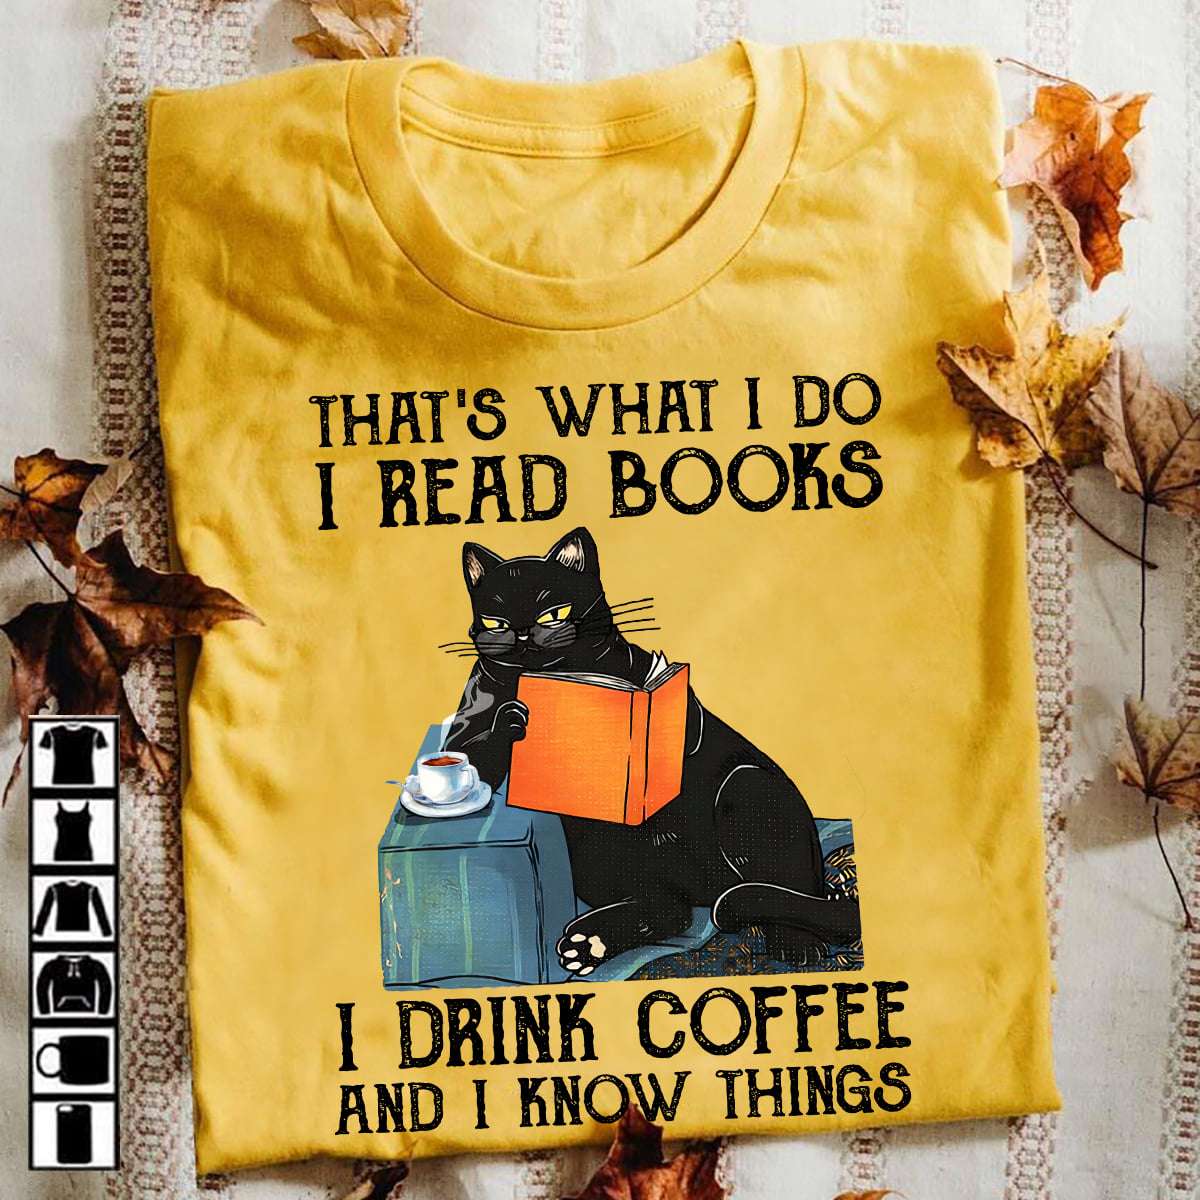 That's what I do I read books I drink coffee and I know things - Black cat reading books, book and coffee lover